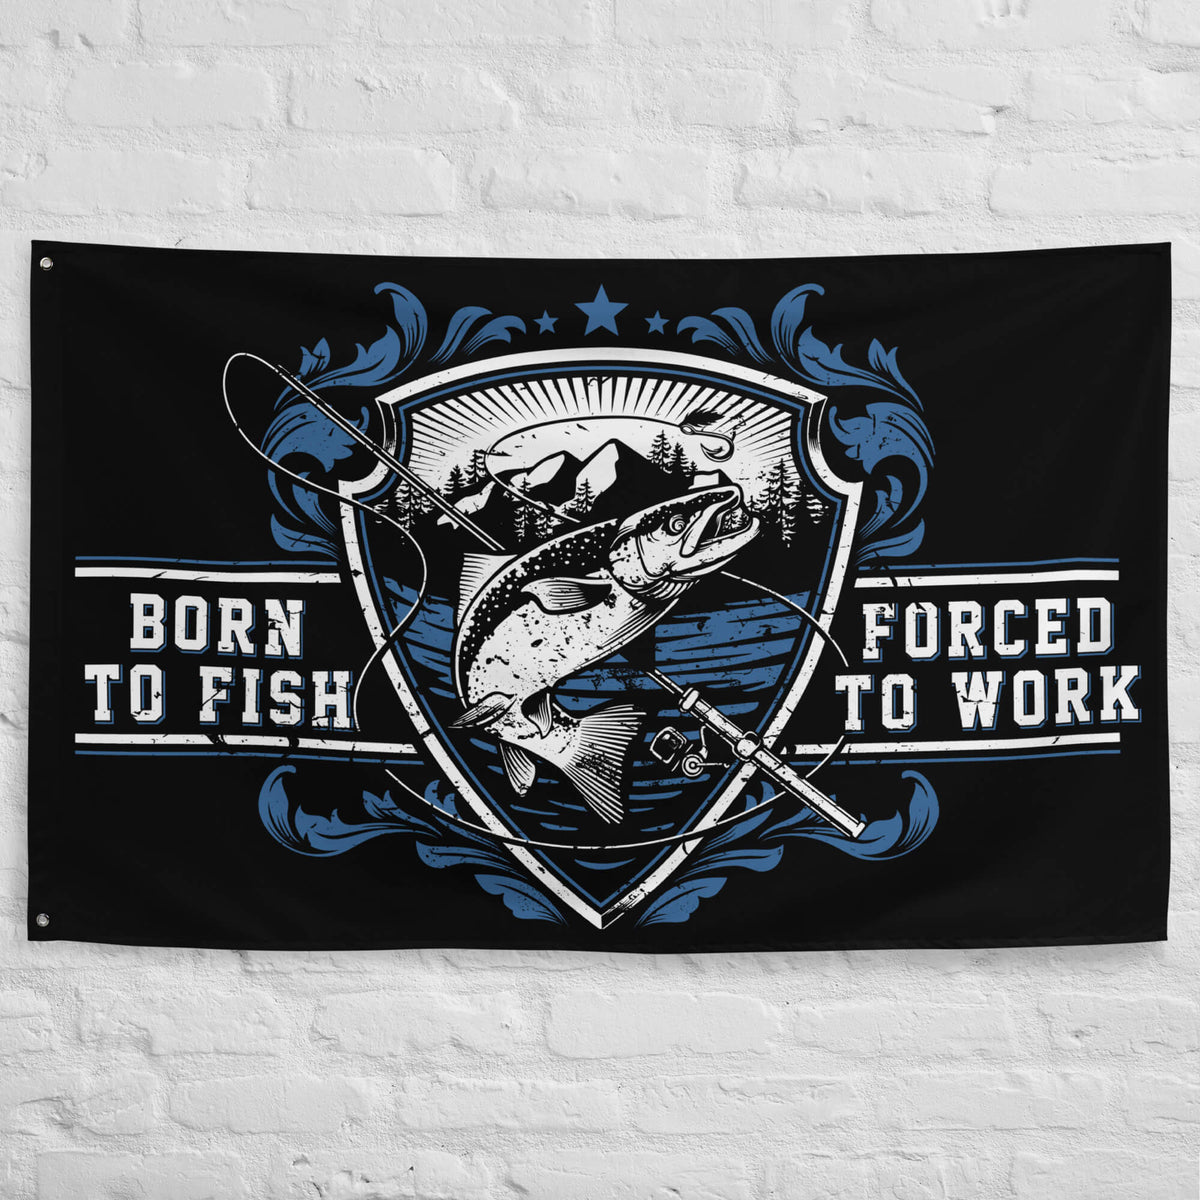 Born To Fish Forced To Work (Fishing Flag)